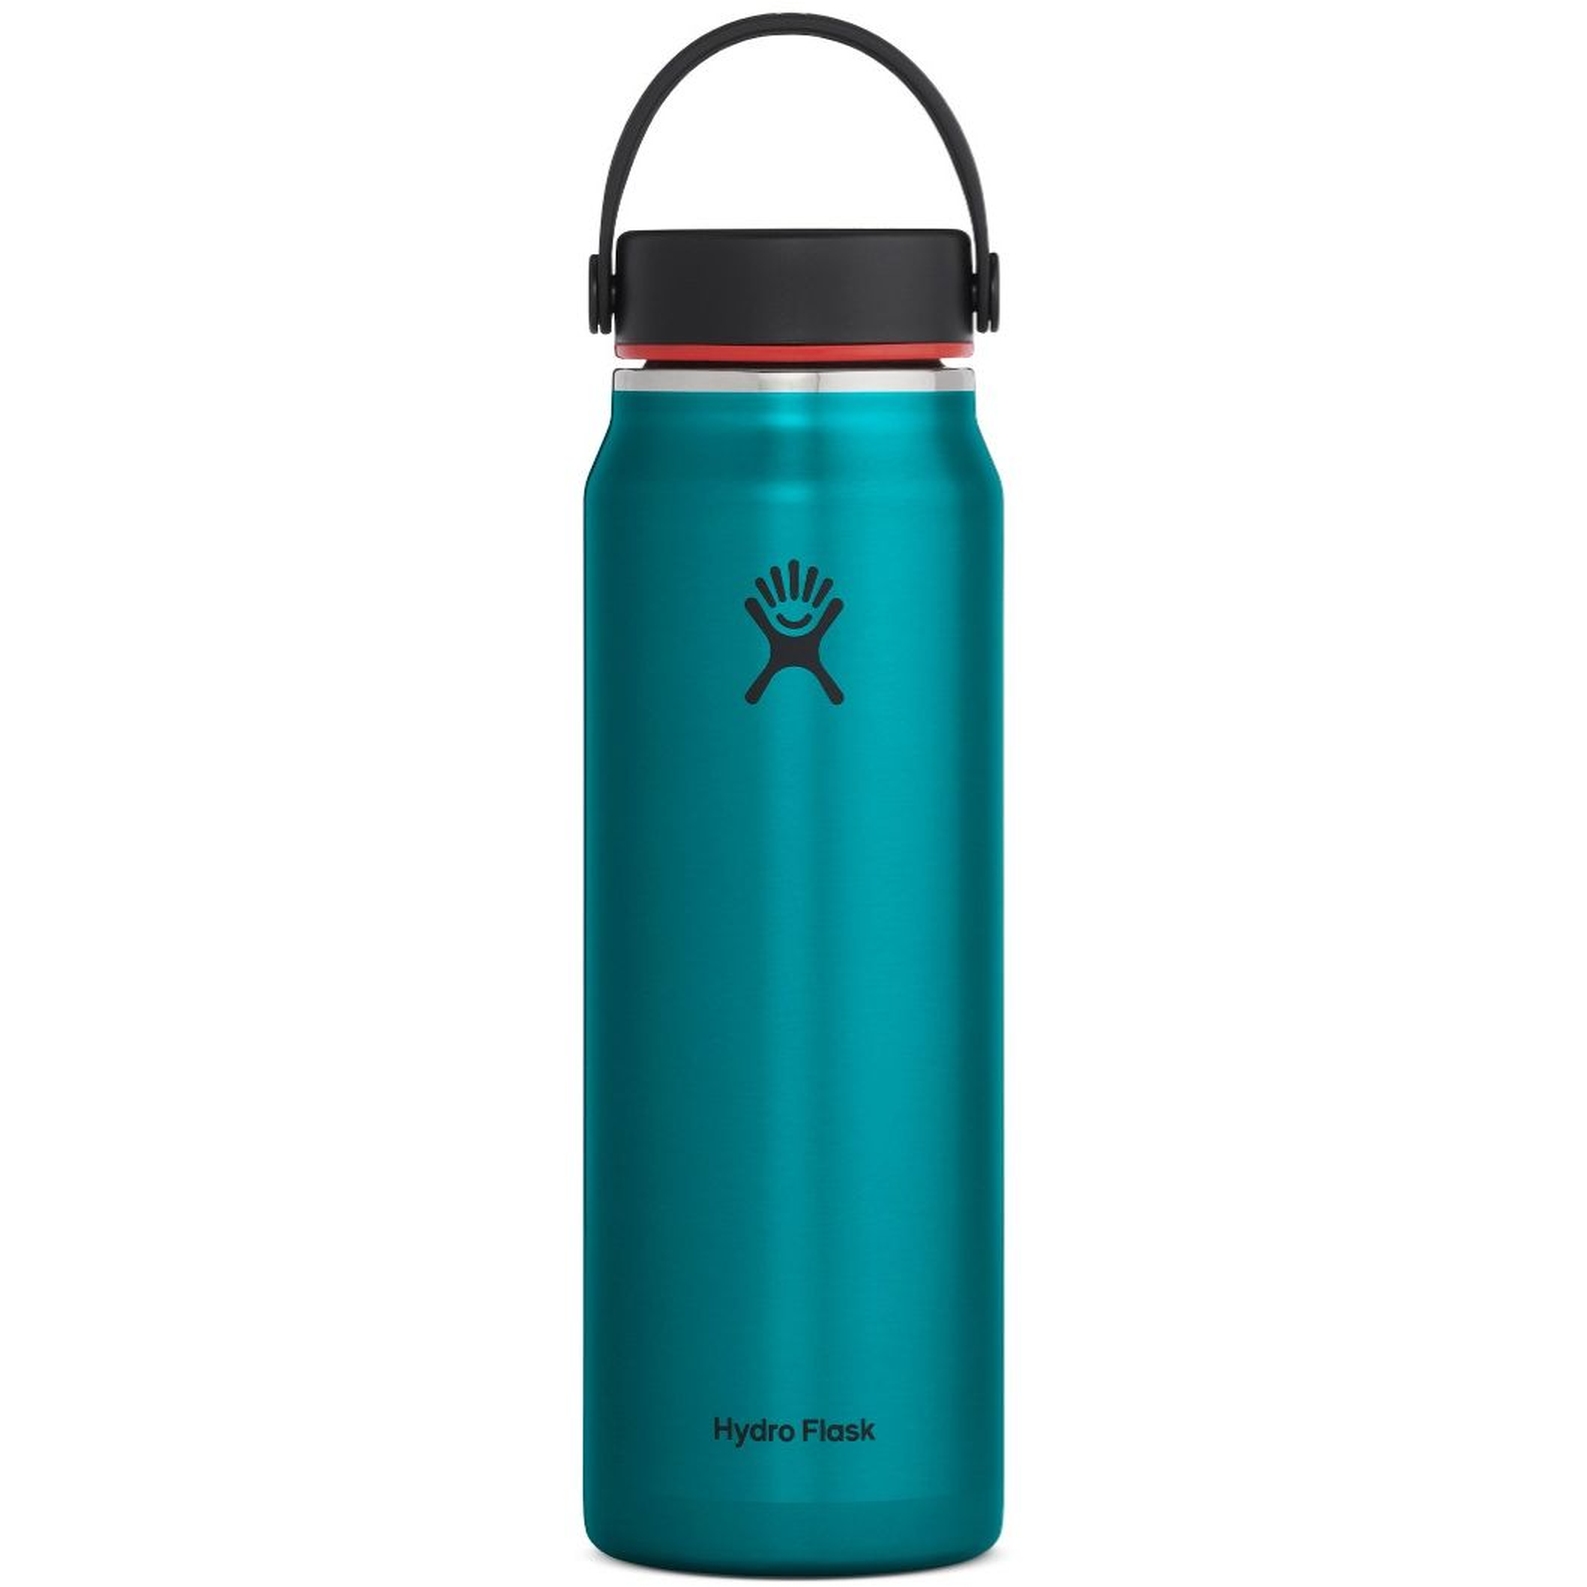 Image of Hydro Flask 32 oz Lightweight Wide Mouth Trail Series Insulated Bottle - 946 ml - Celestine